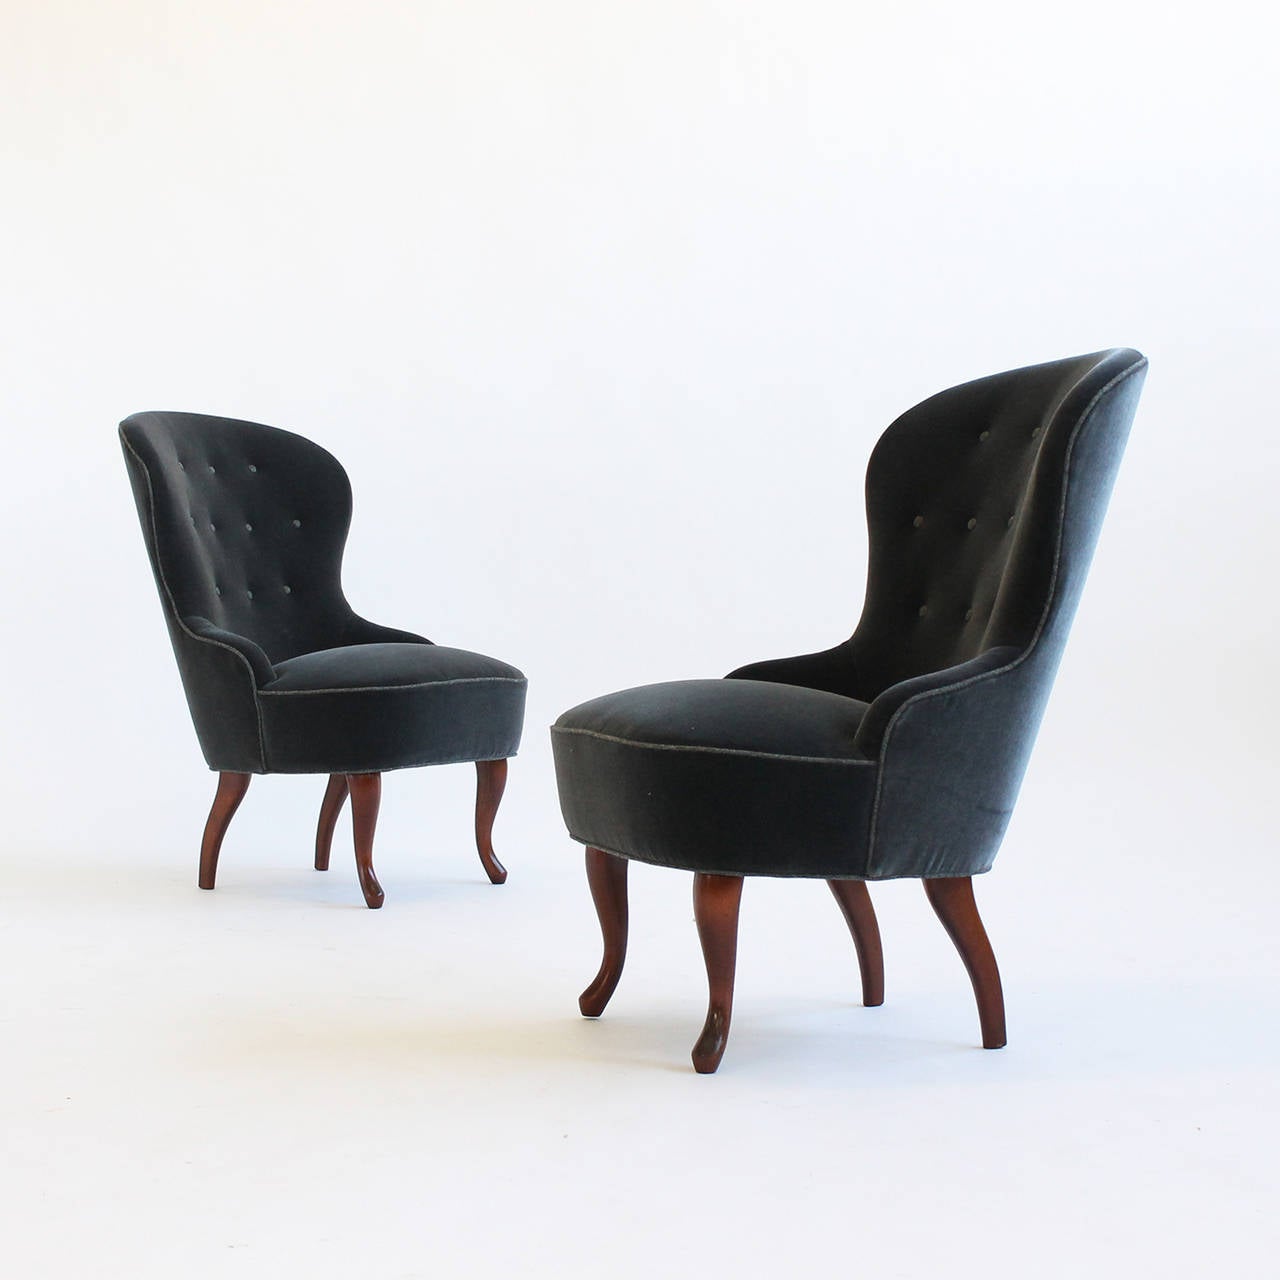 Vintage pair of Swedish slipper chairs. Newly restored and upholstered in a slate blue mohair.